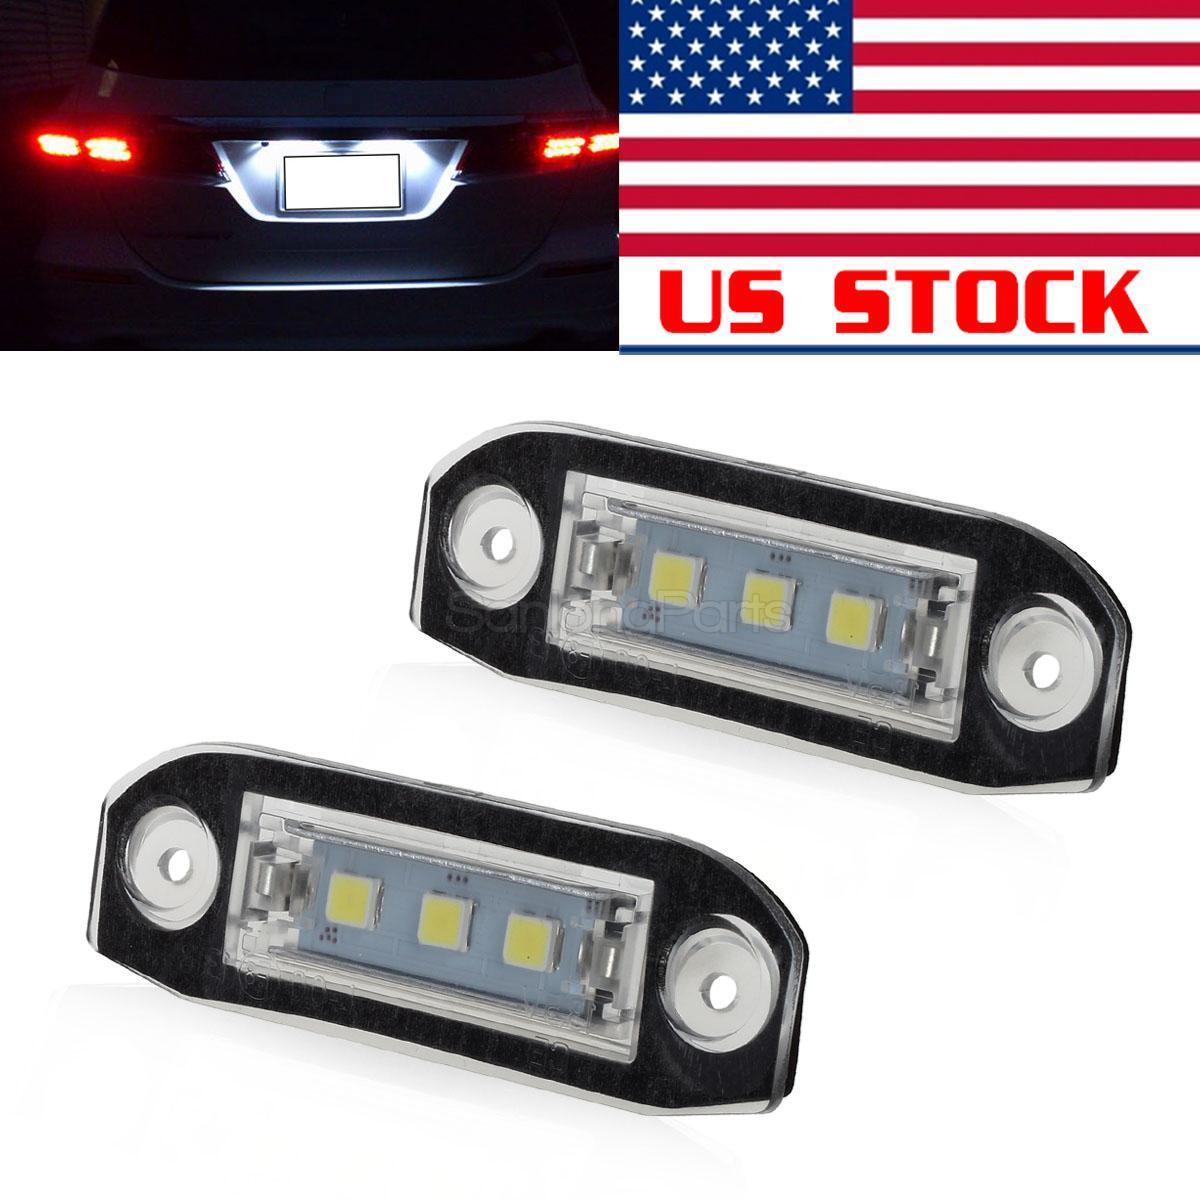 2pcs White LED License Plate Lights Number Lamps Bulbs for Volvo XC60 XC70 XC90